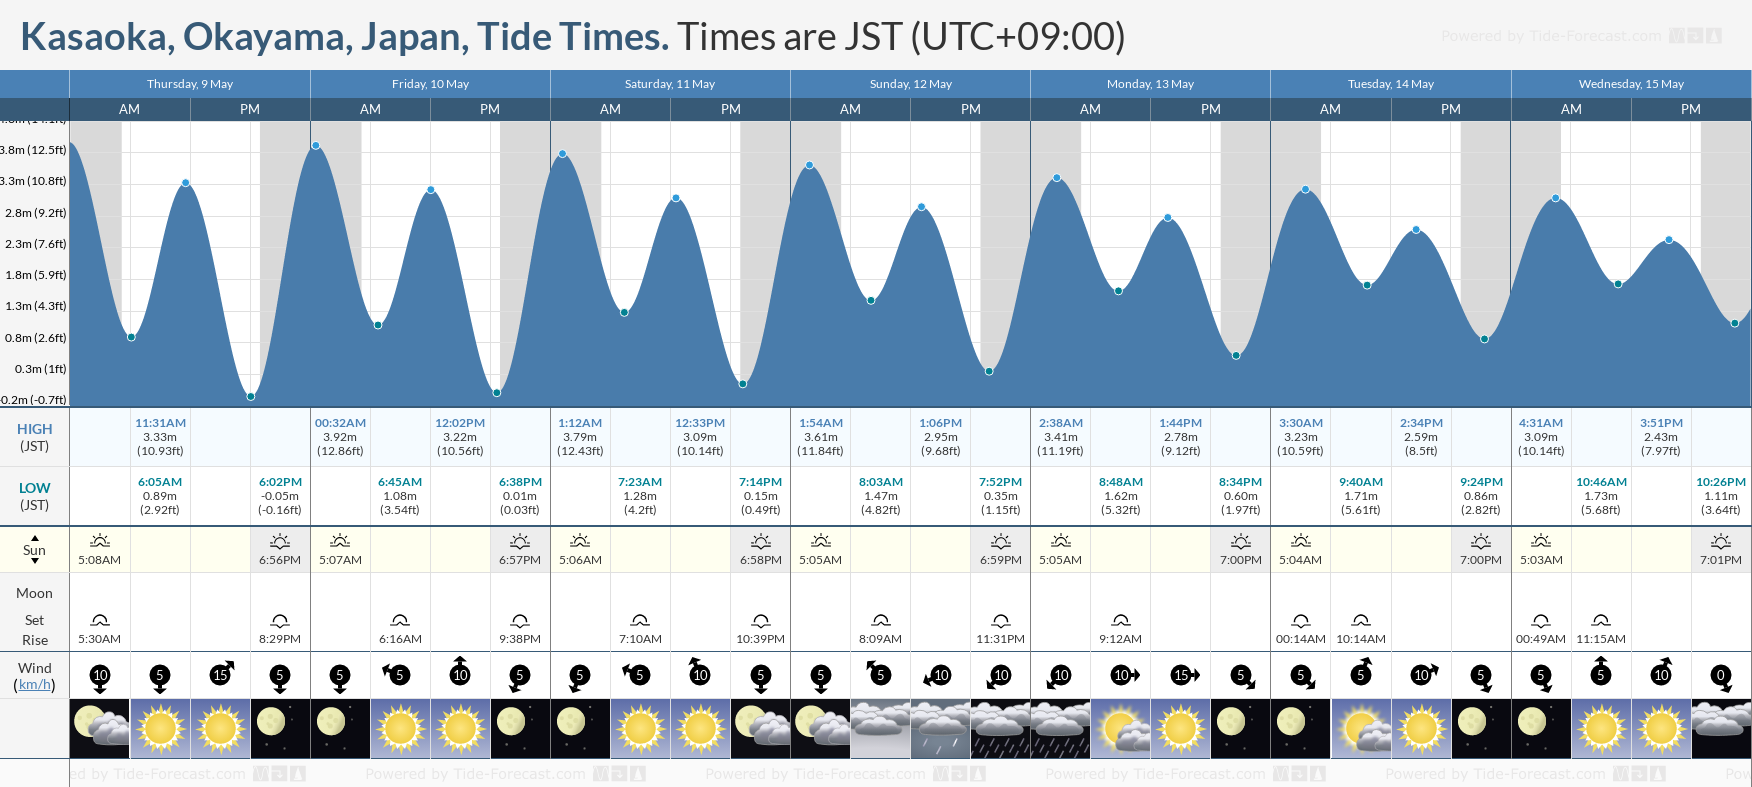 Kasaoka, Okayama, Japan Tide Chart including high and low tide times for the next 7 days